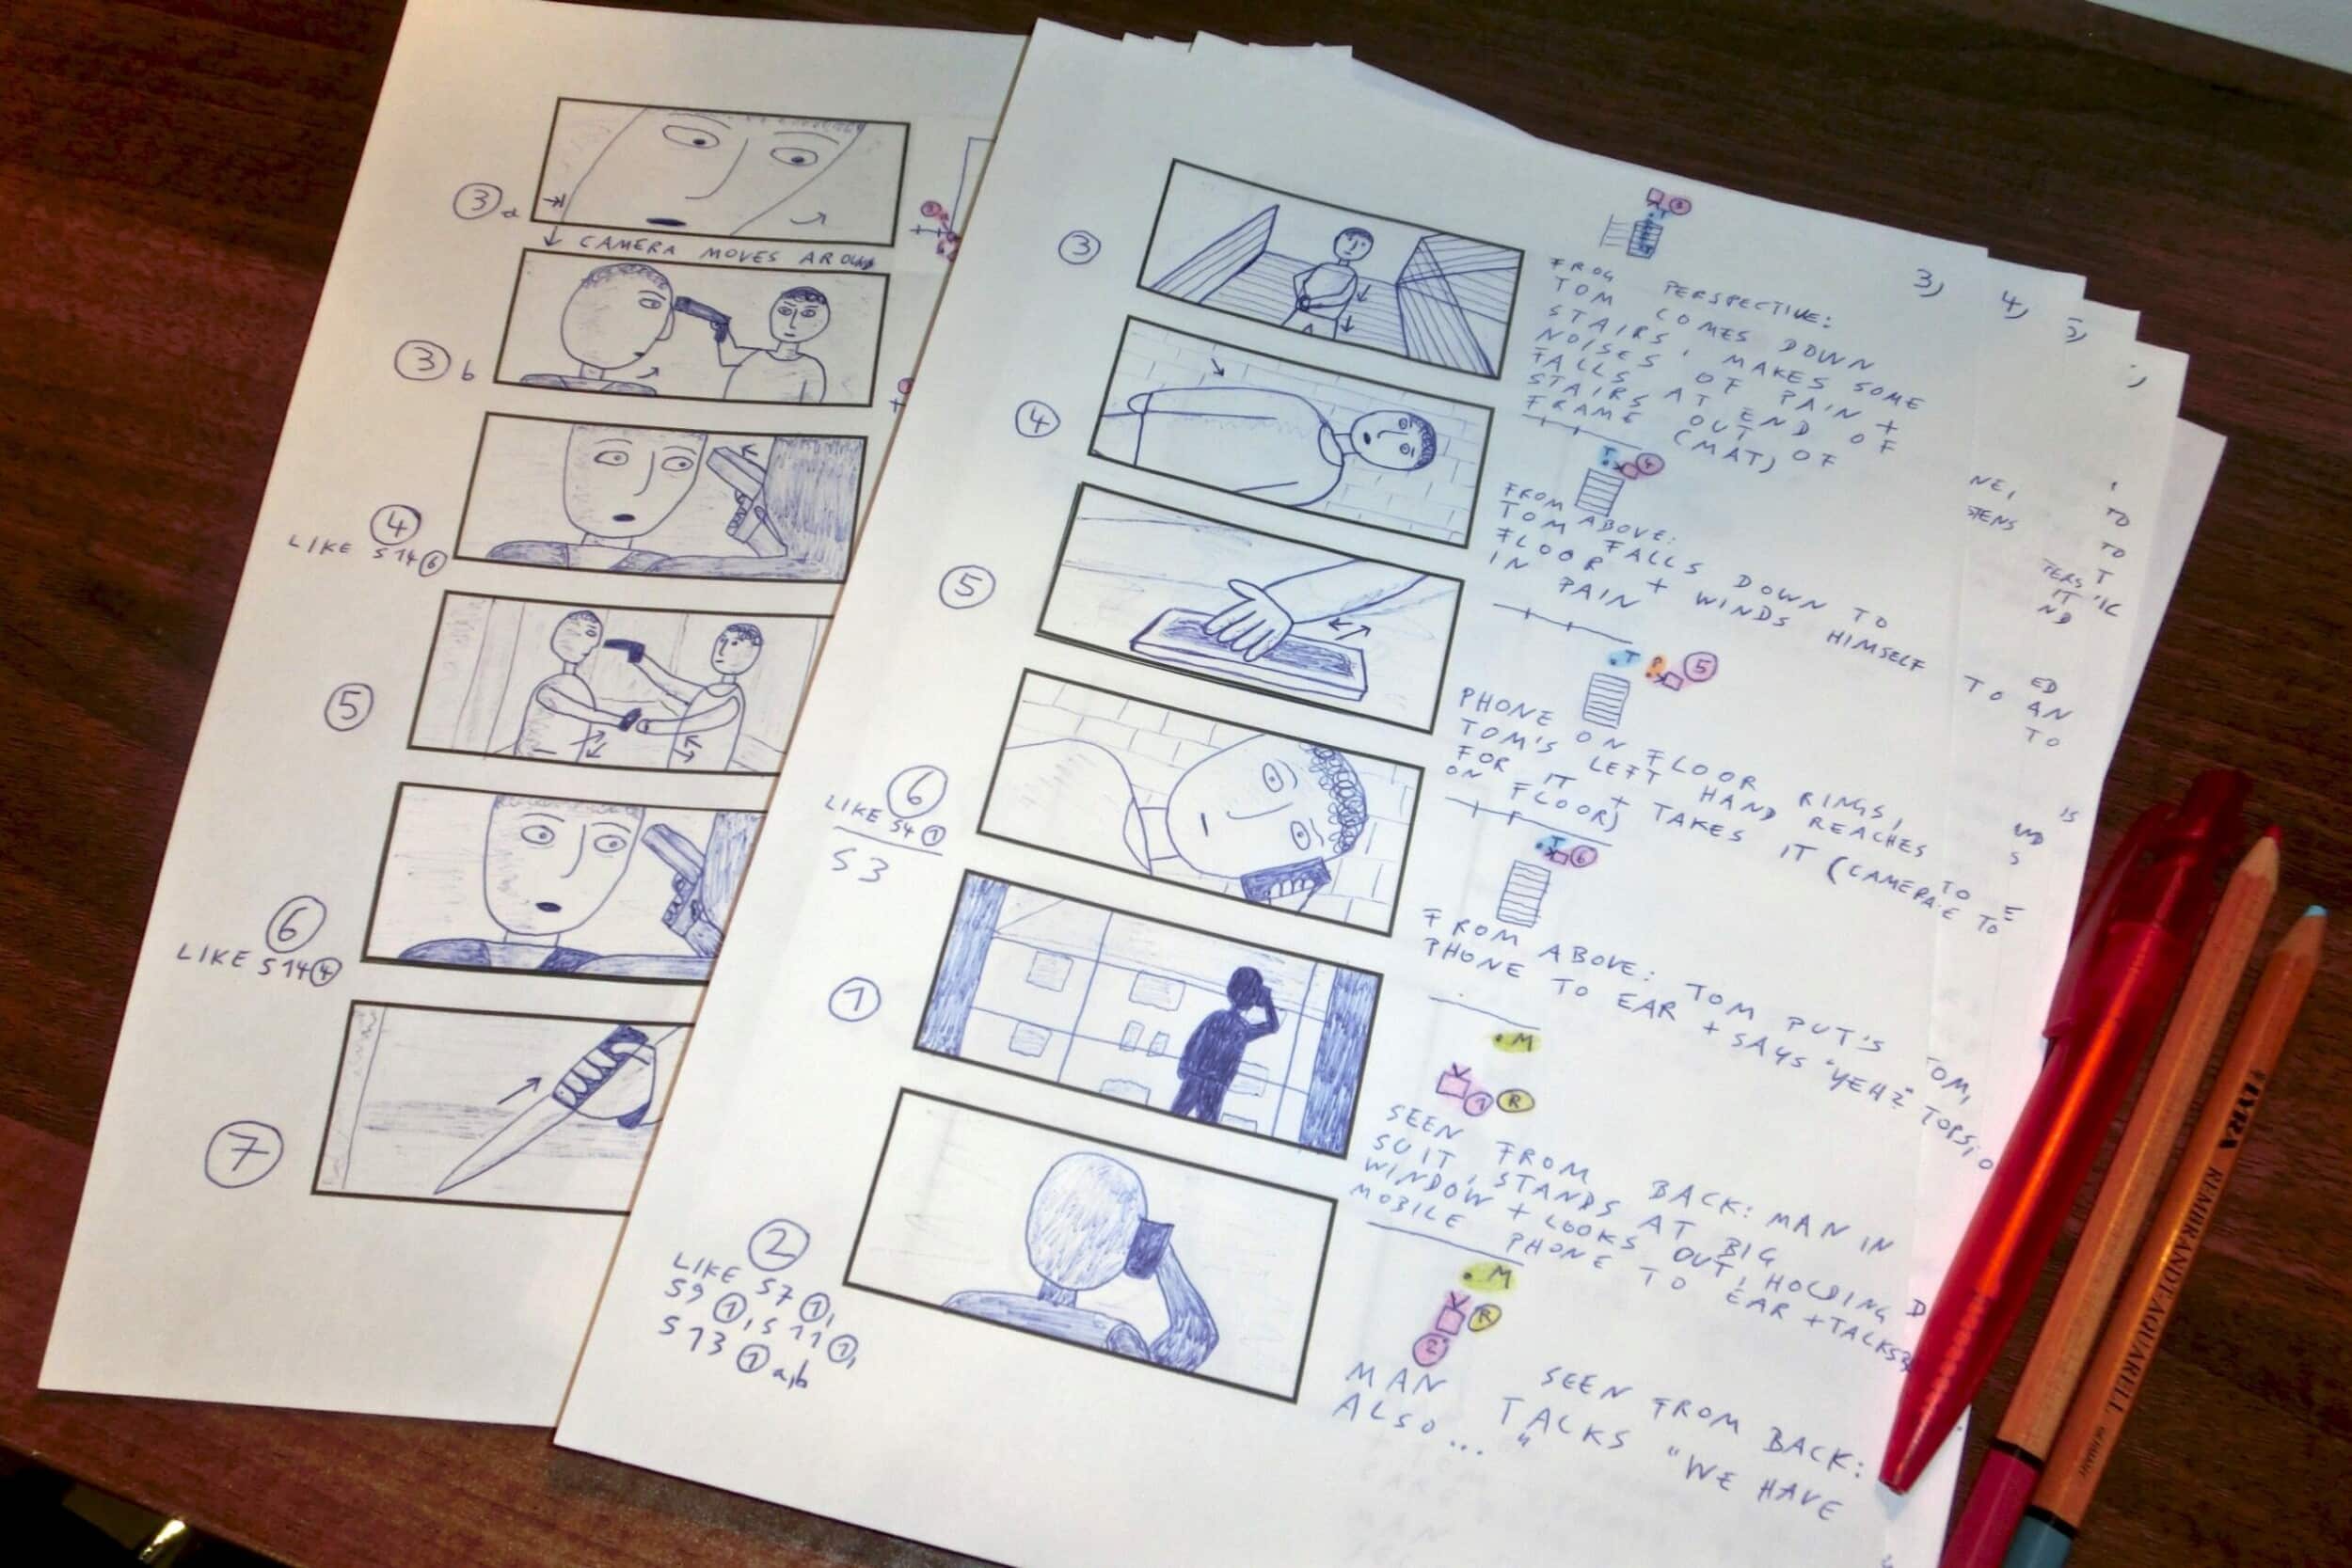 Planning a Shoot: My Way of Storyboarding by Marco Schleicher, MA